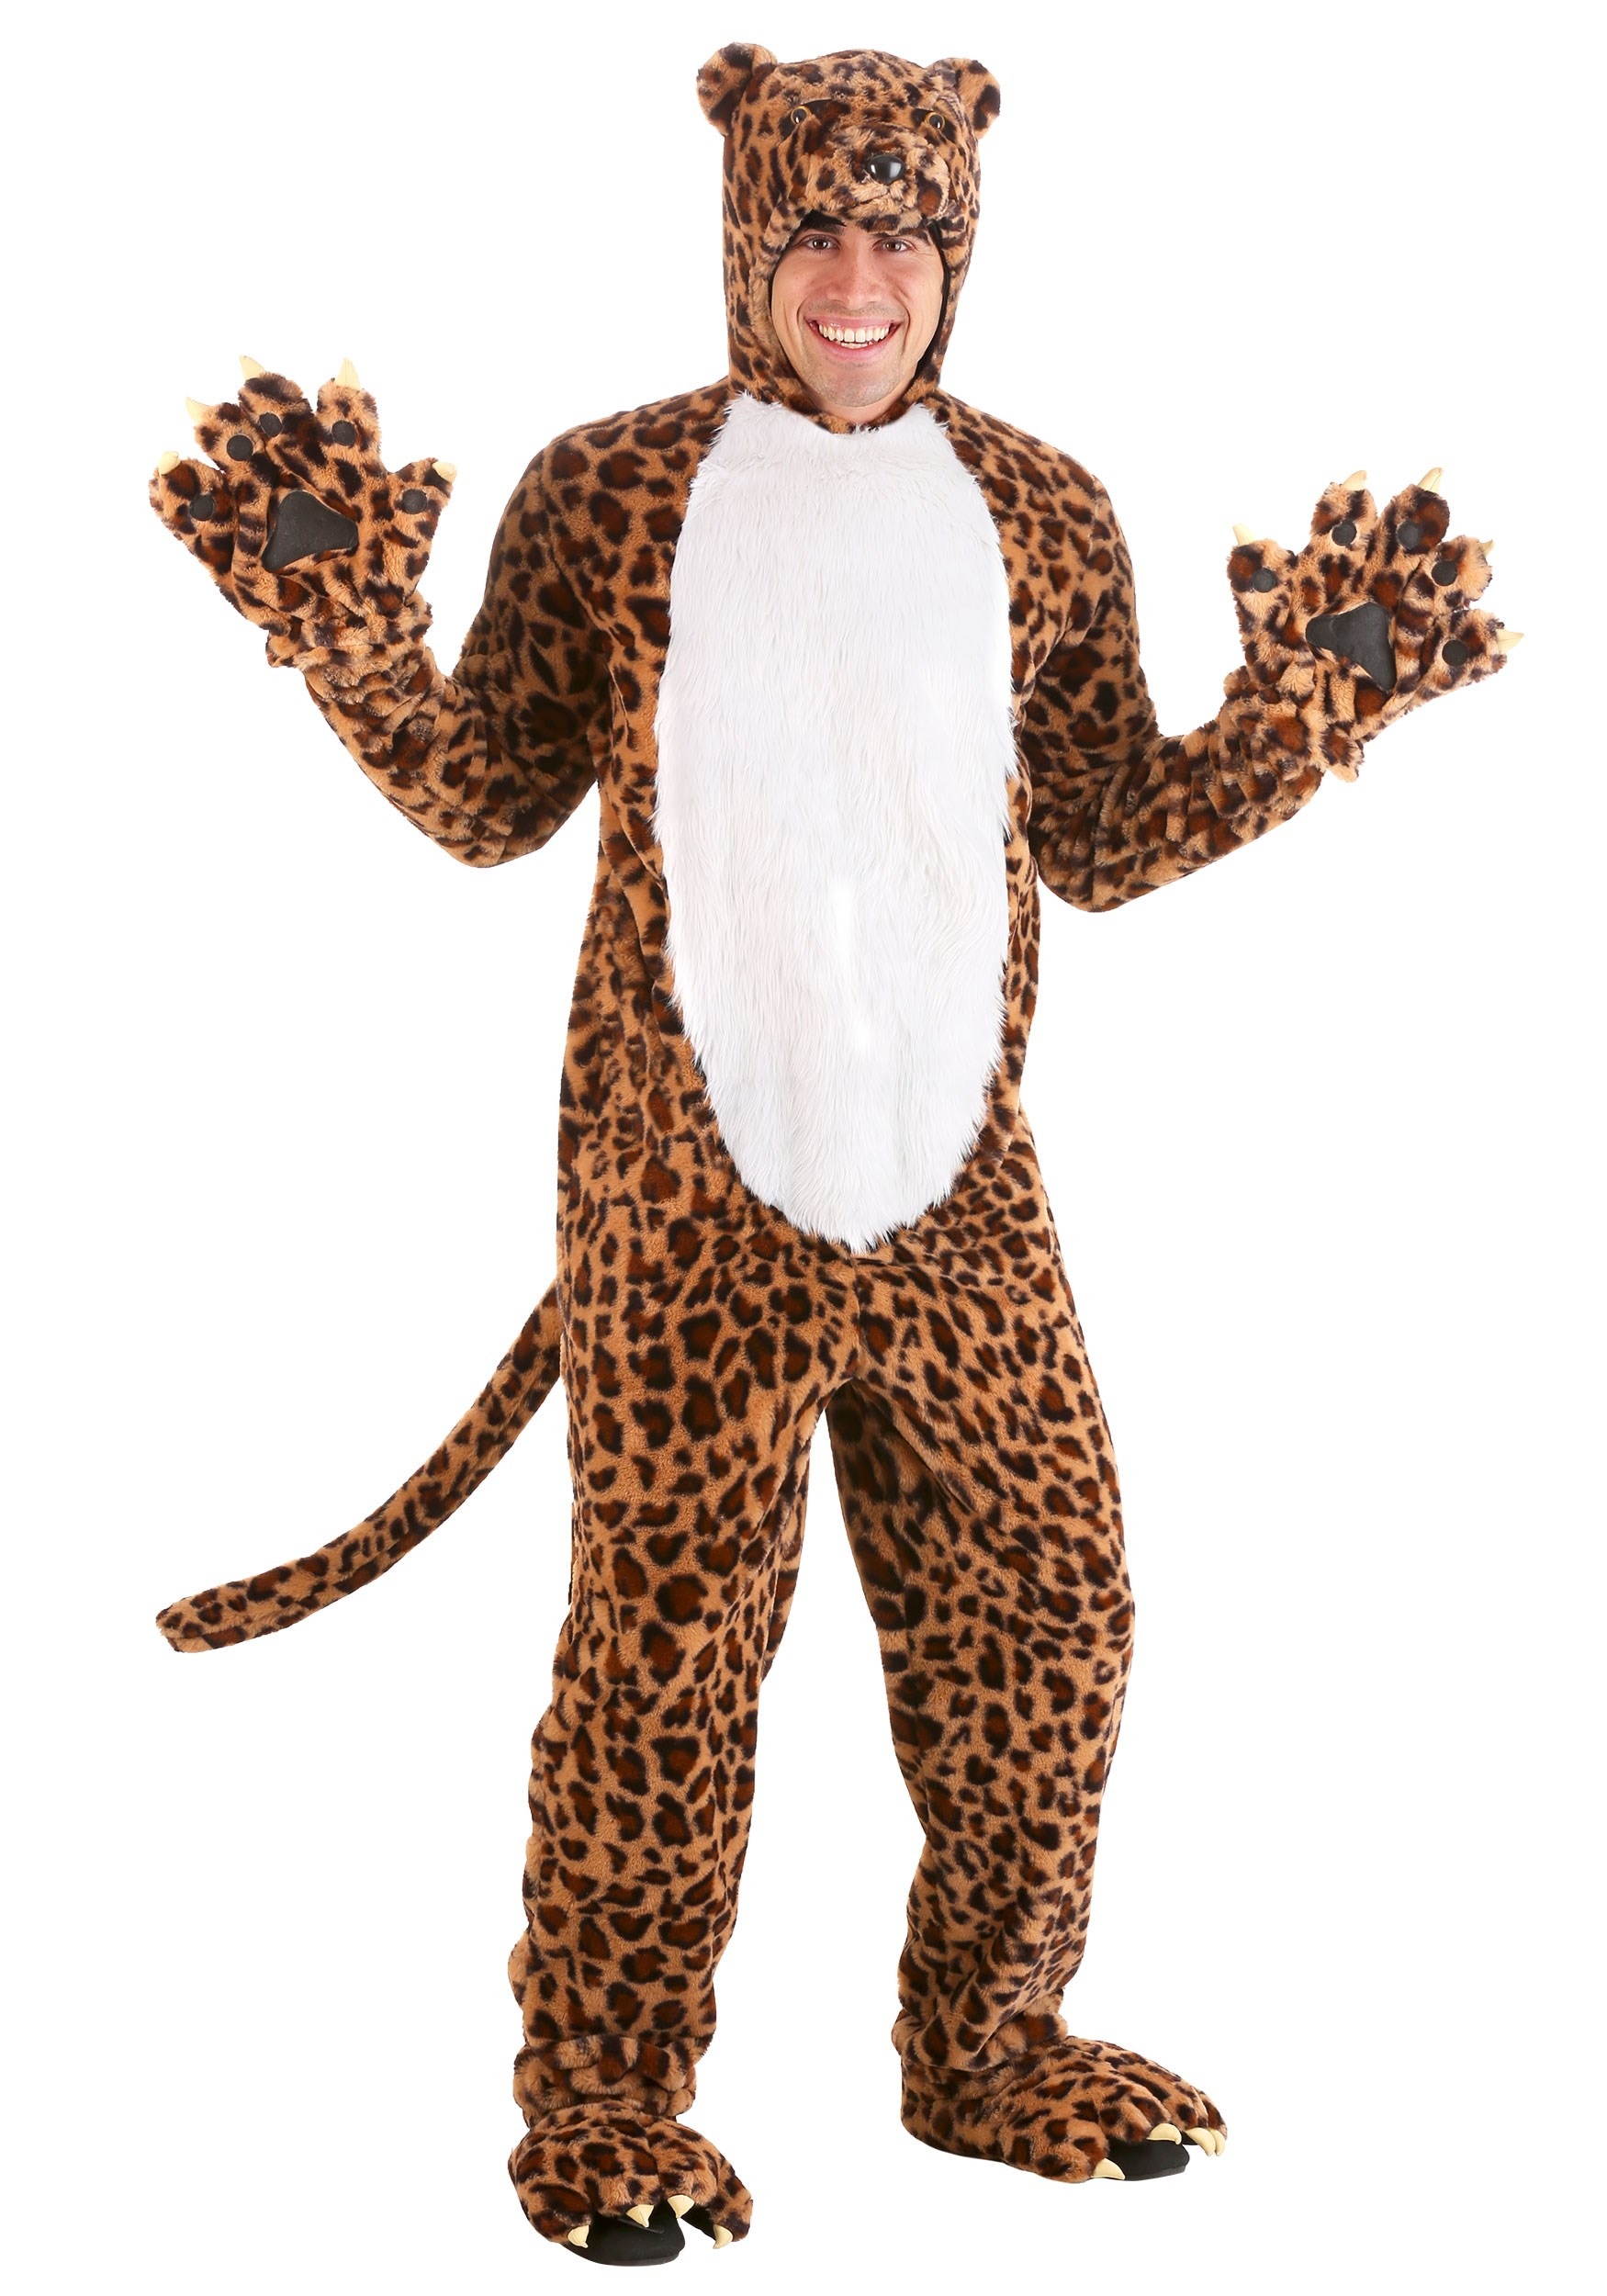 Photos - Fancy Dress Leopard FUN Costumes Leapin'  Costume for Adults Black/Brown/White 